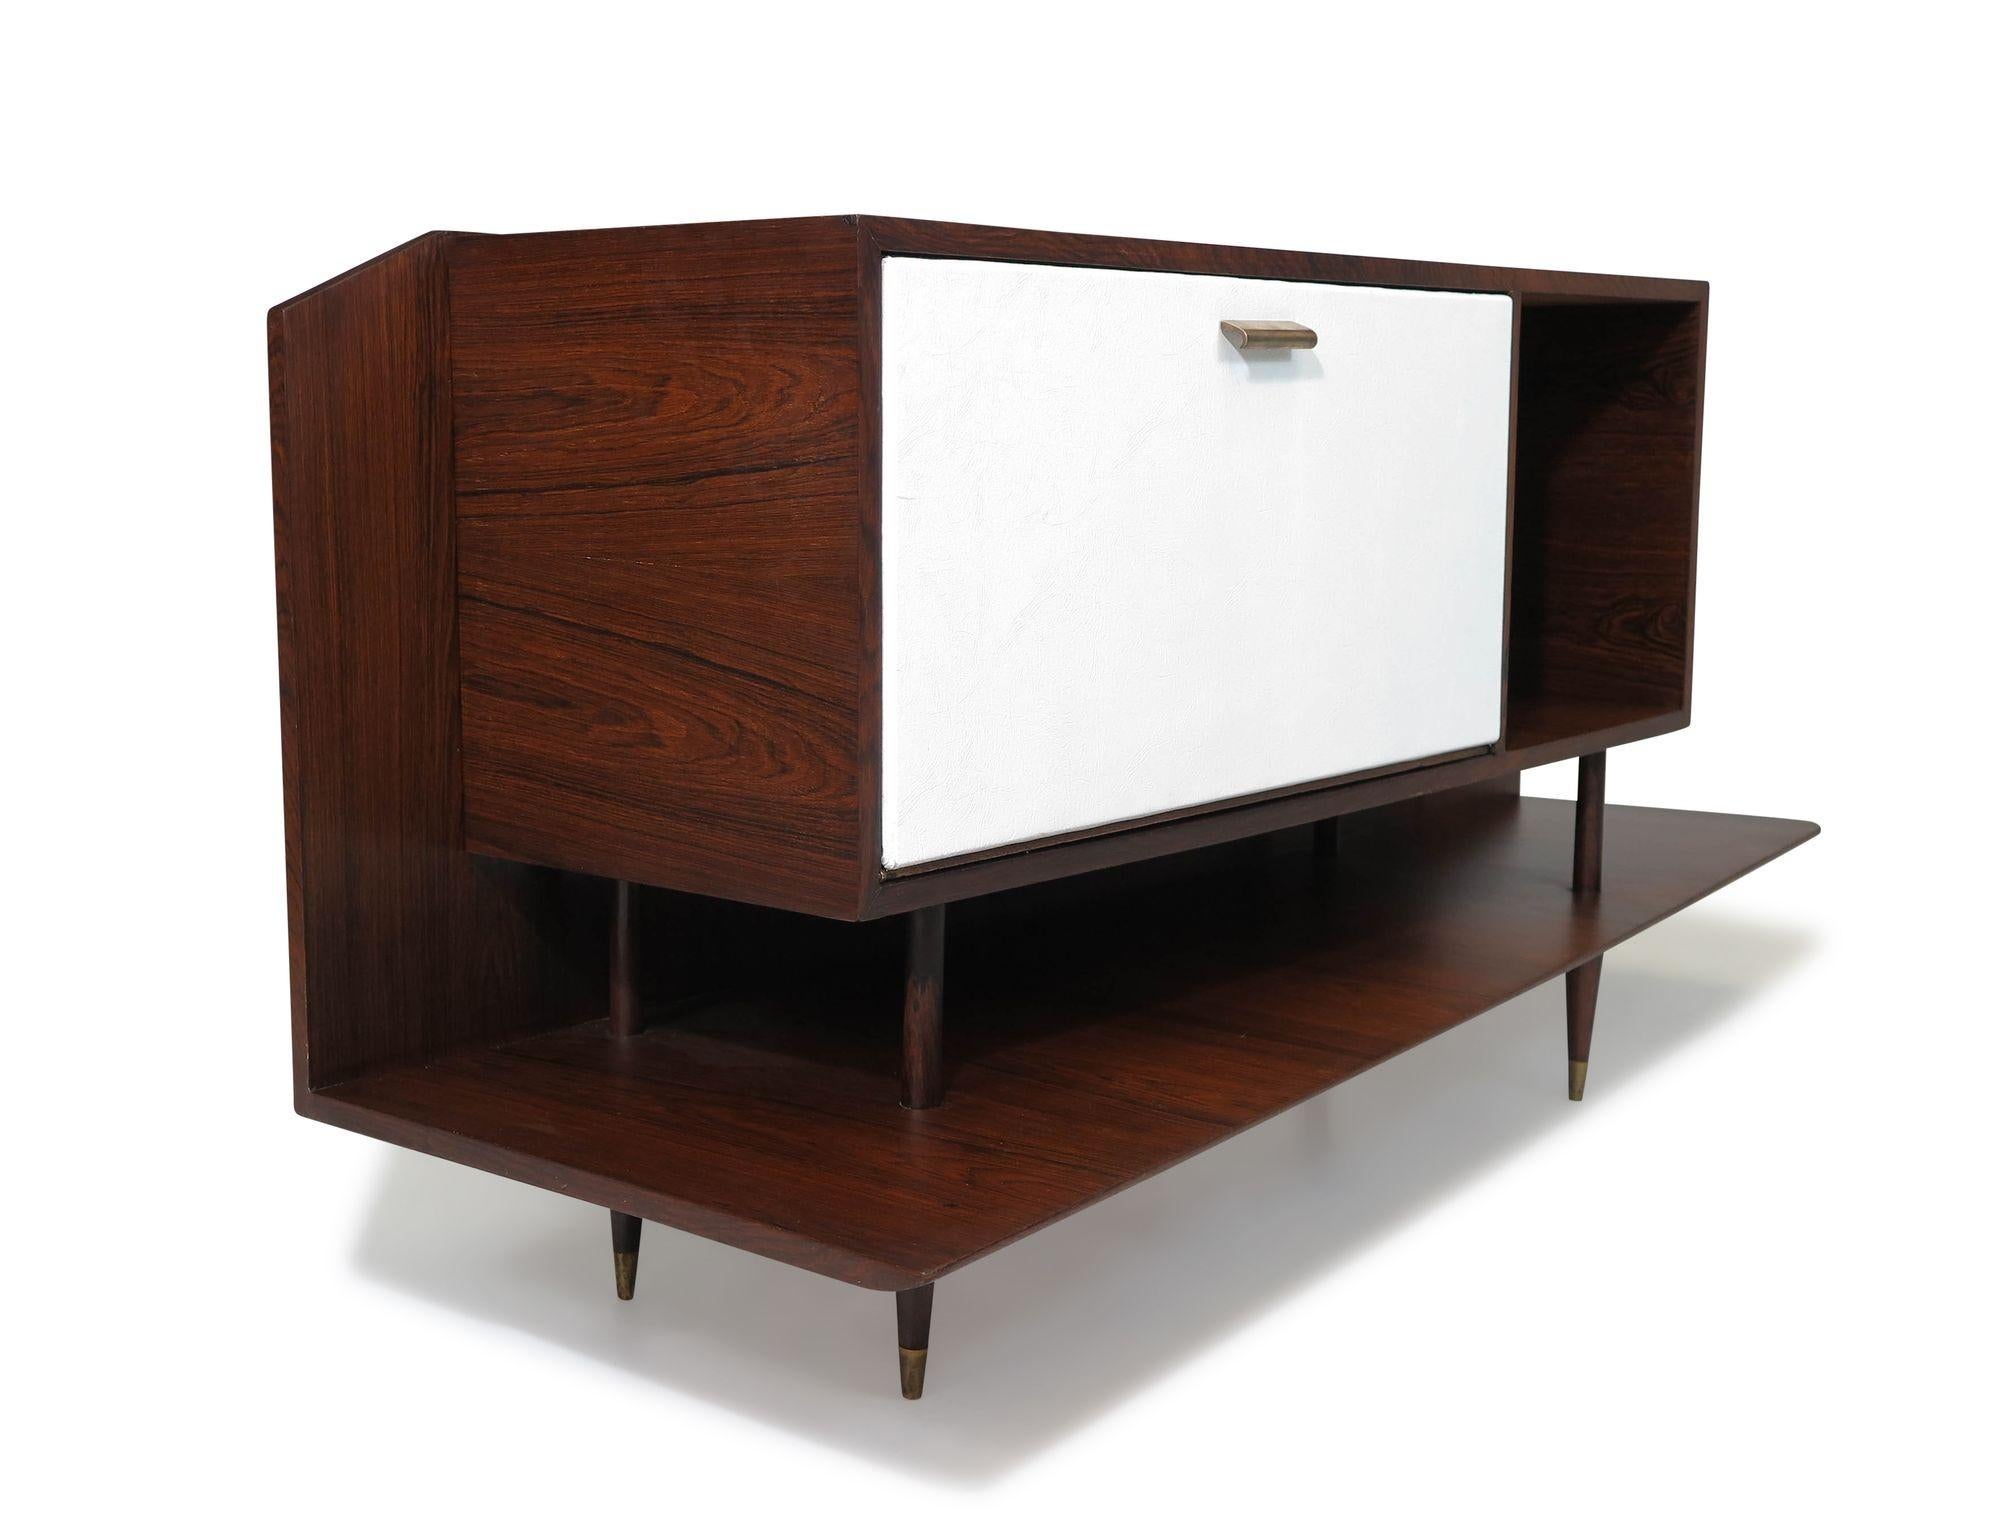 Brazilian Modern bar cabinet with an angular design attributed to Giuseppe Scapinelli, 1955, São Paulo, Brazil. This eye-catching and unique mid-century cabinet is crafted of Brazilian rosewood, and features a white vinyl-covered drop-front cabinet